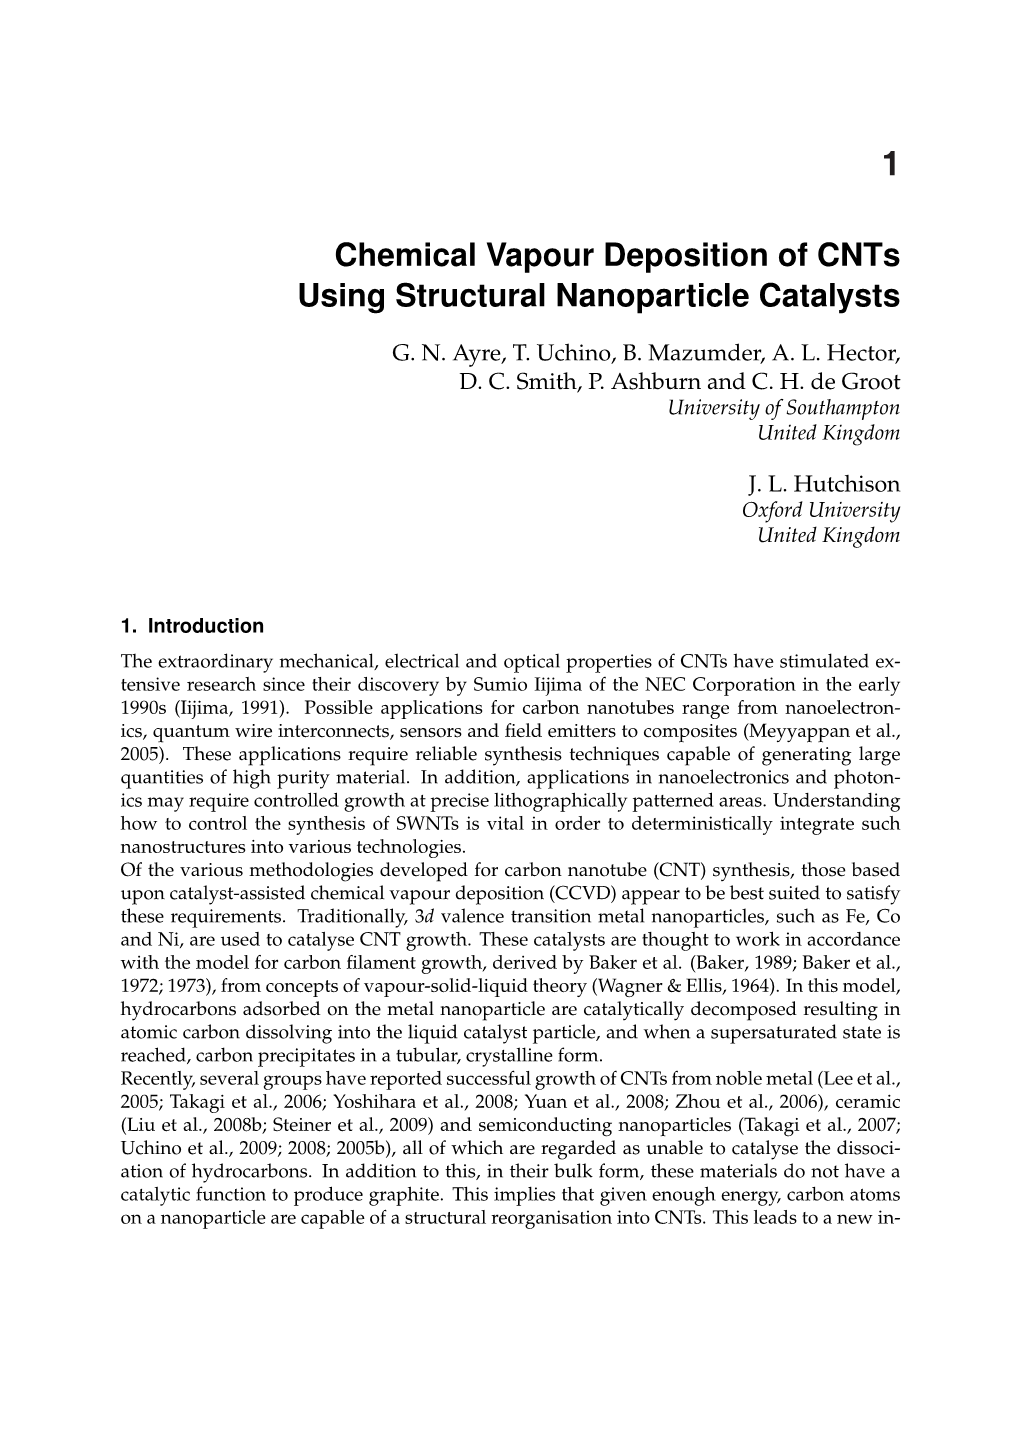 Chemical Vapour Deposition of Cnts Using Structural Nanoparticle Catalysts 1